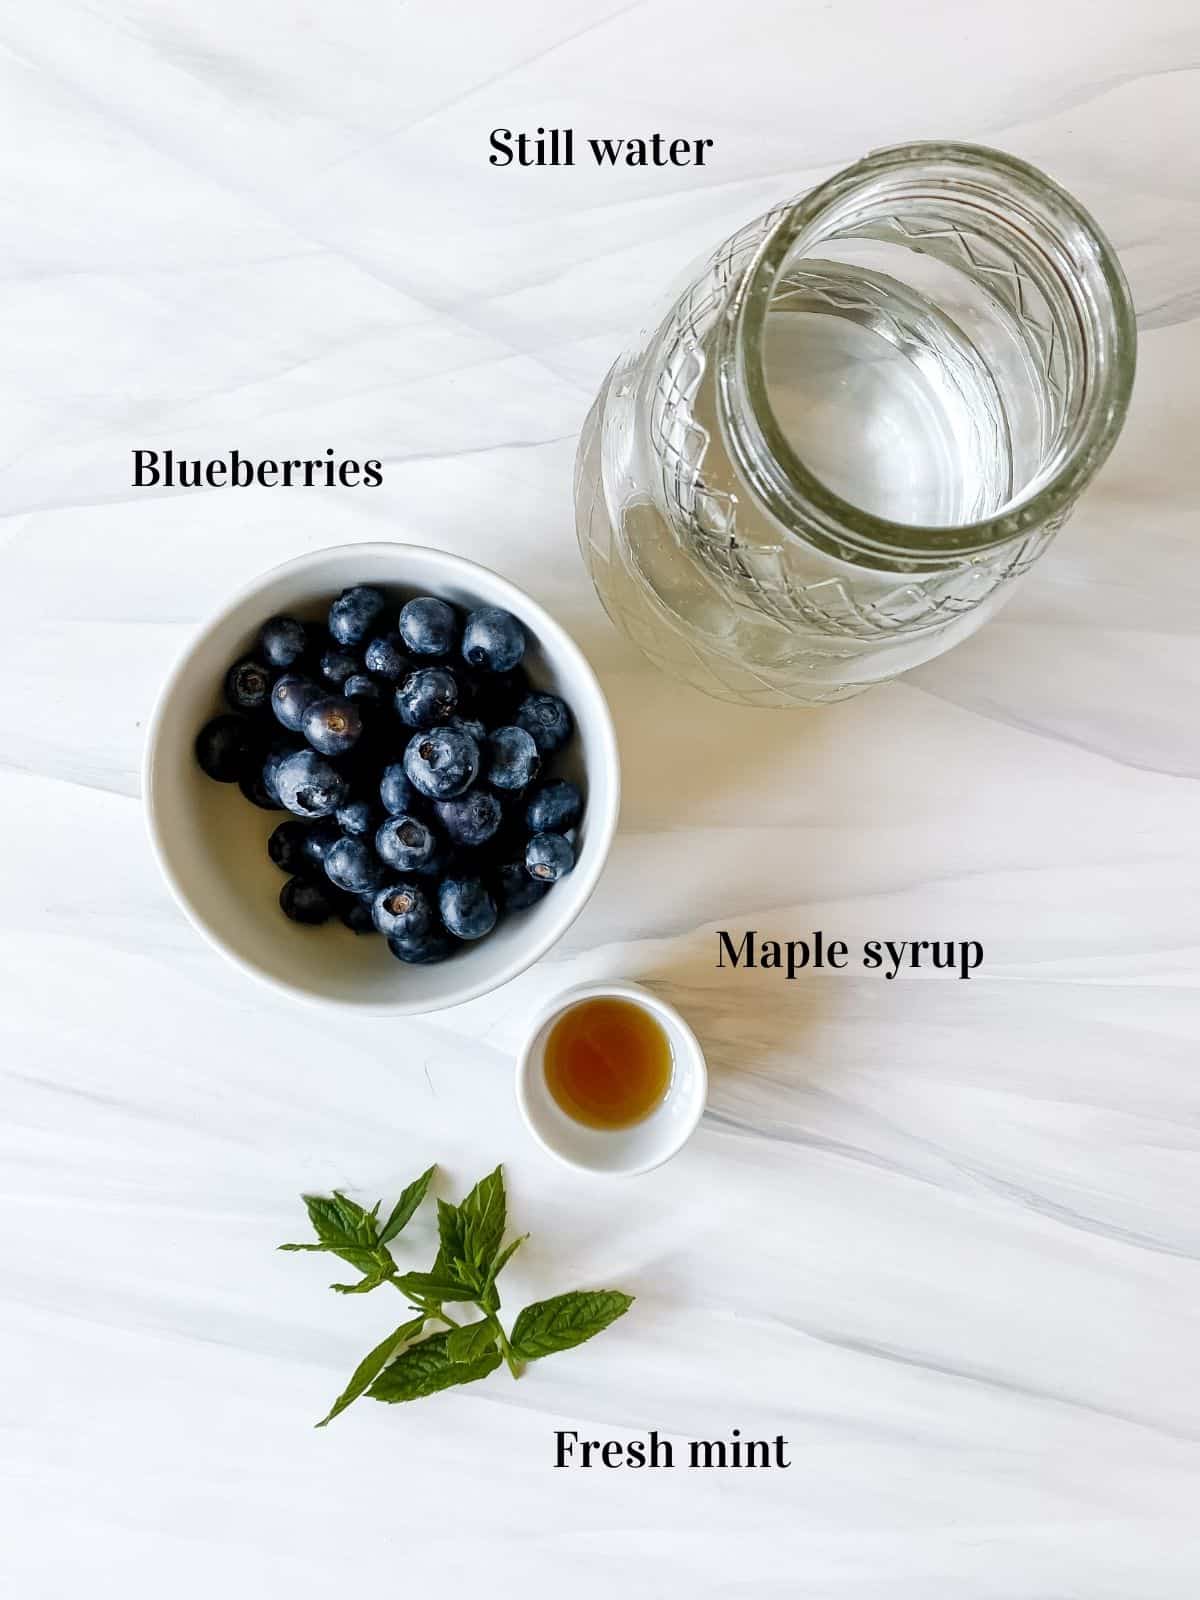 labelled bowl of blueberries, jug of water, bowl of maple syrup and fresh mint.